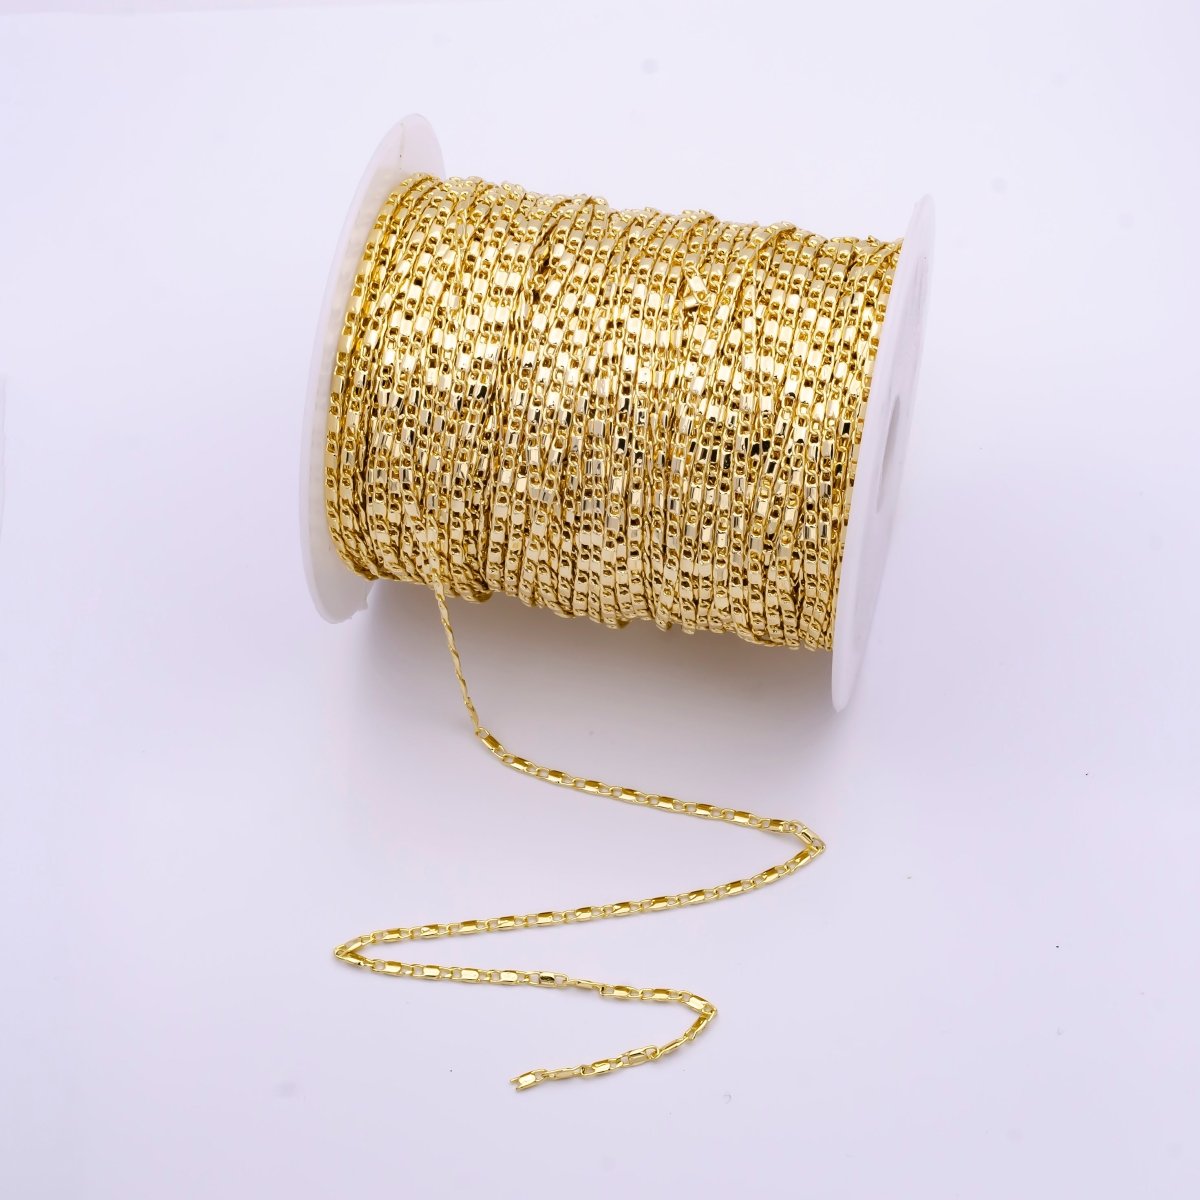 Clearance Pricing BLOWOUT 24K Gold Filled Unique Flat Link Unfinished Chain Jewelry Supply by Yard | ROLL-822 - DLUXCA